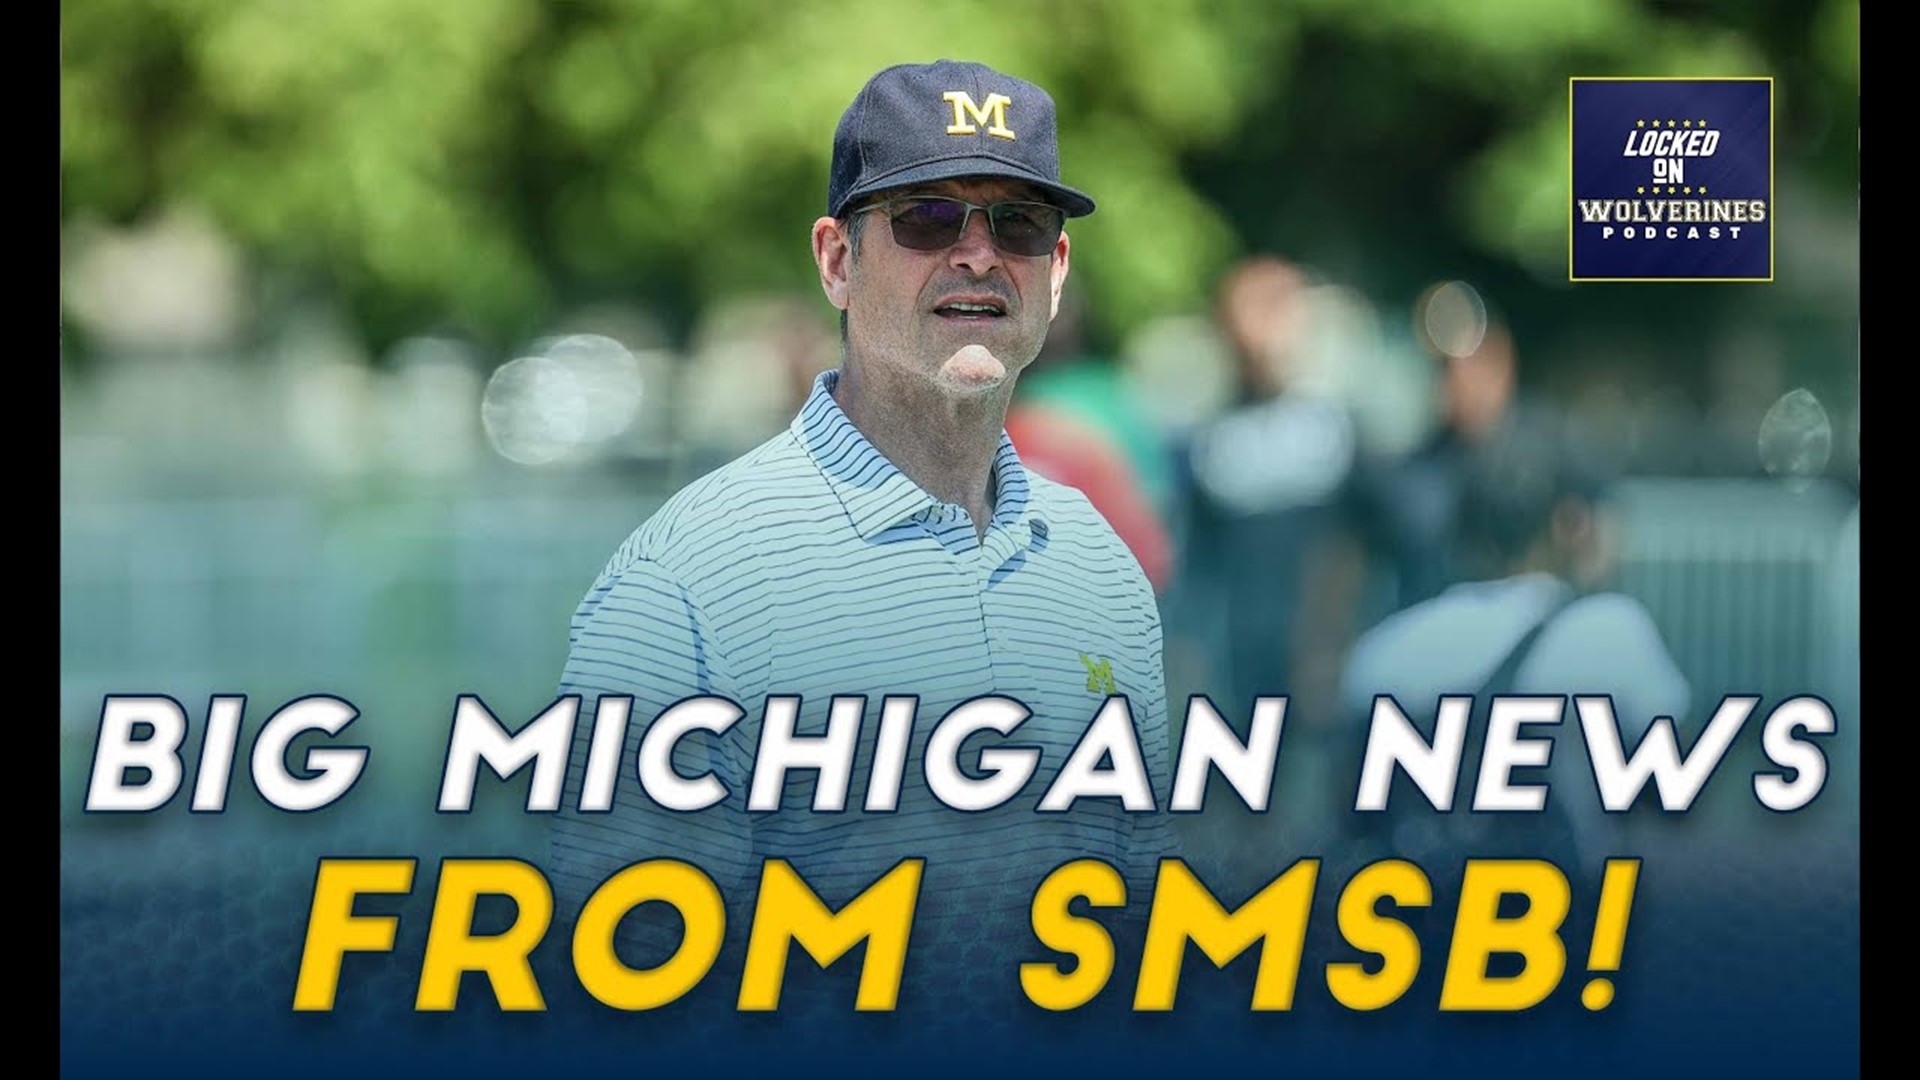 SoundMind SoundBody back in form, as are Jim Harbaugh and Michigan football